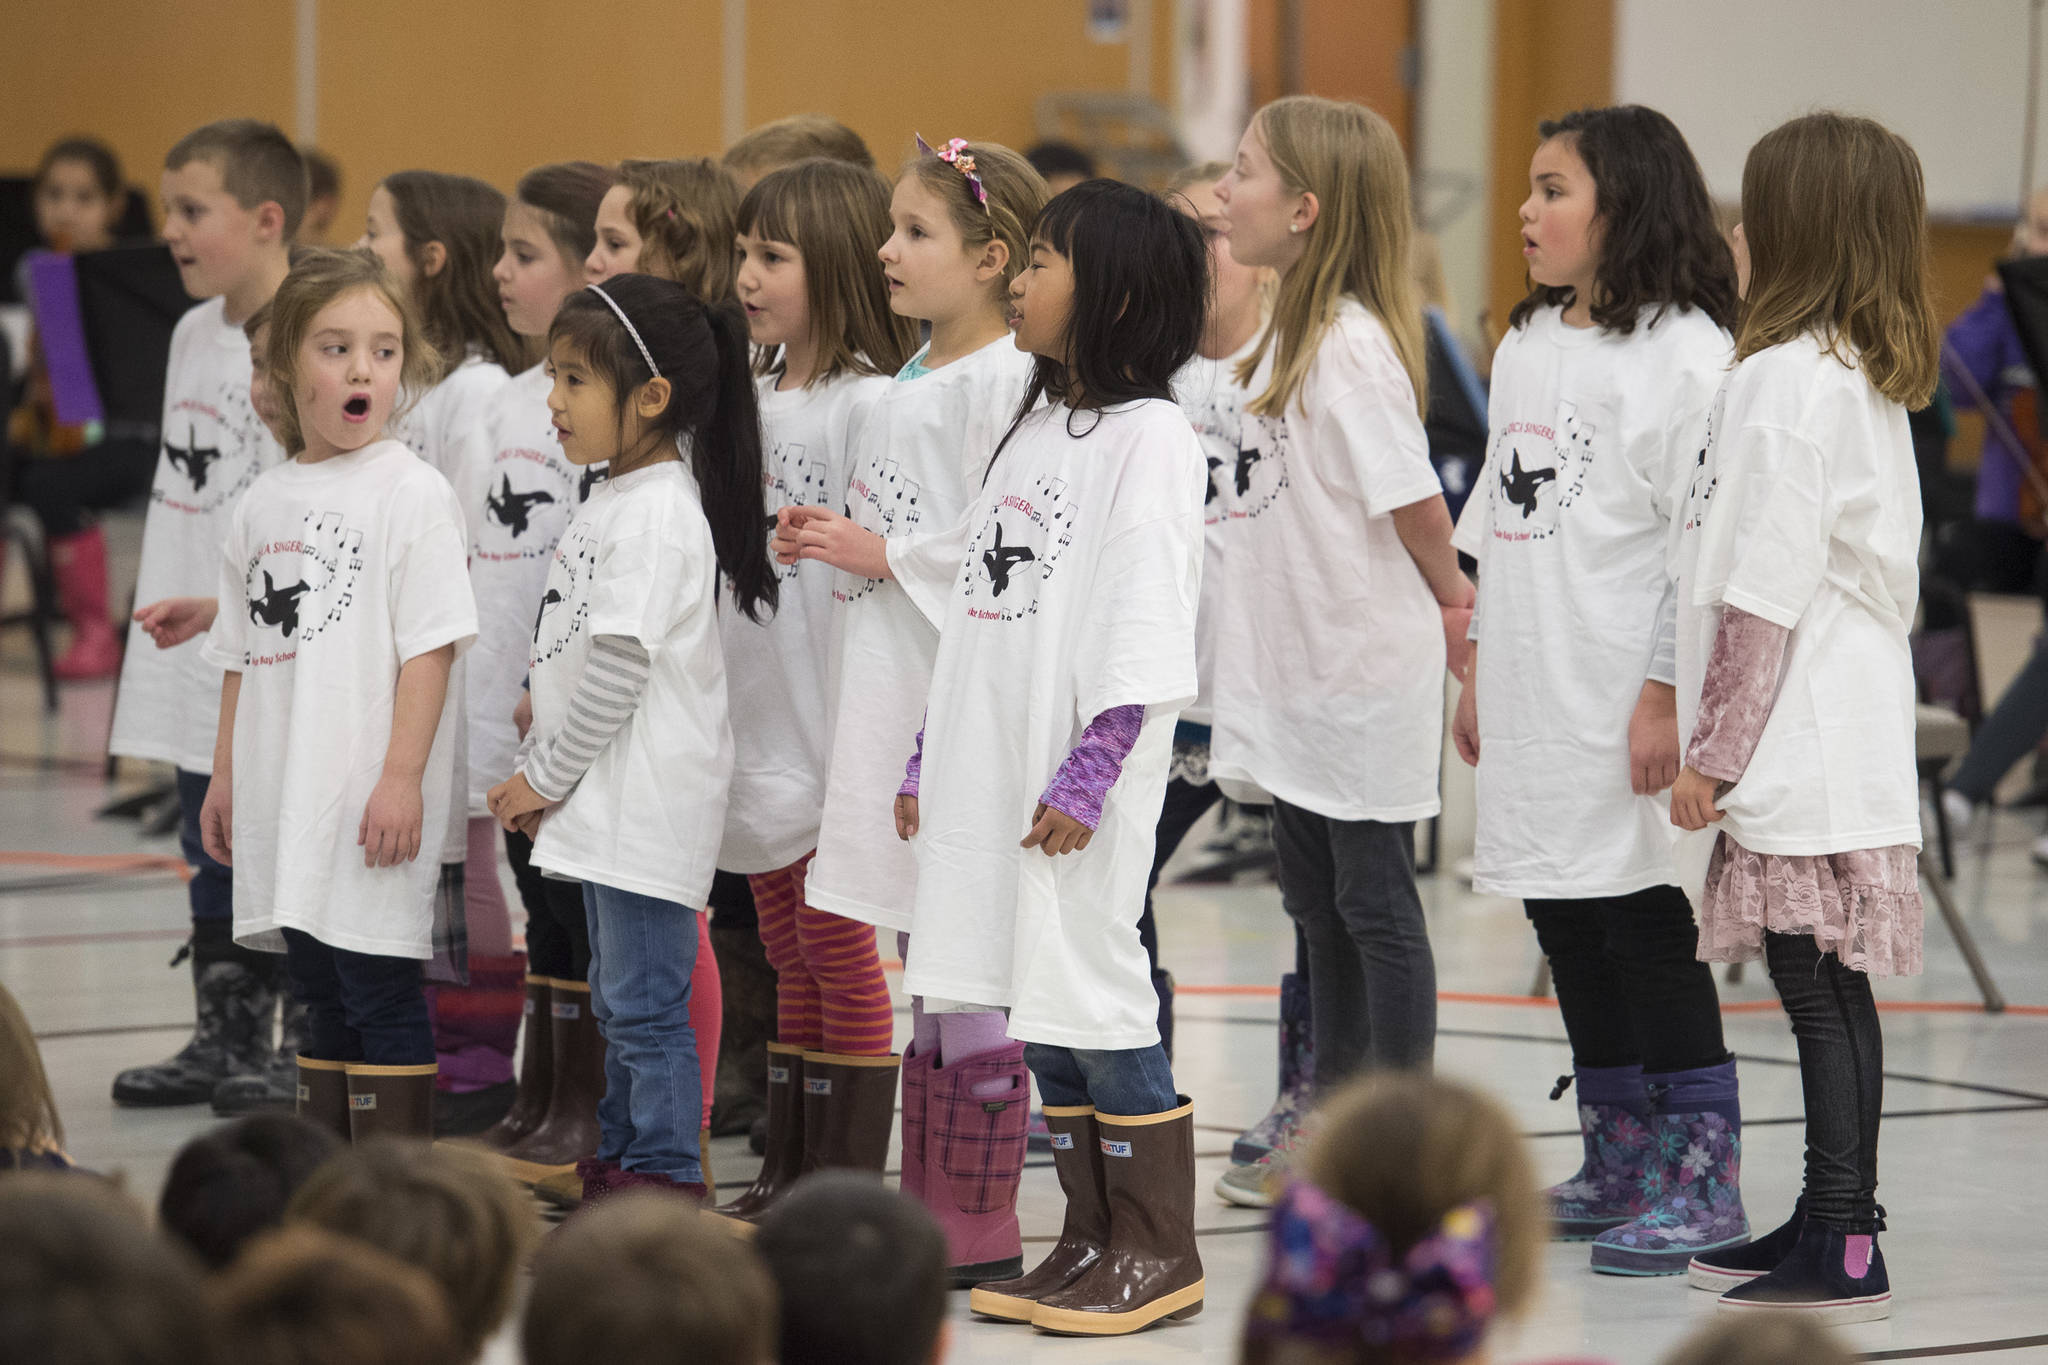 The Orca Singers sing during an assembly celebrating the 50th anniversary of Auke Bay Elementary School on Friday, Nov. 9, 2018. (Michael Penn | Juneau Empire)